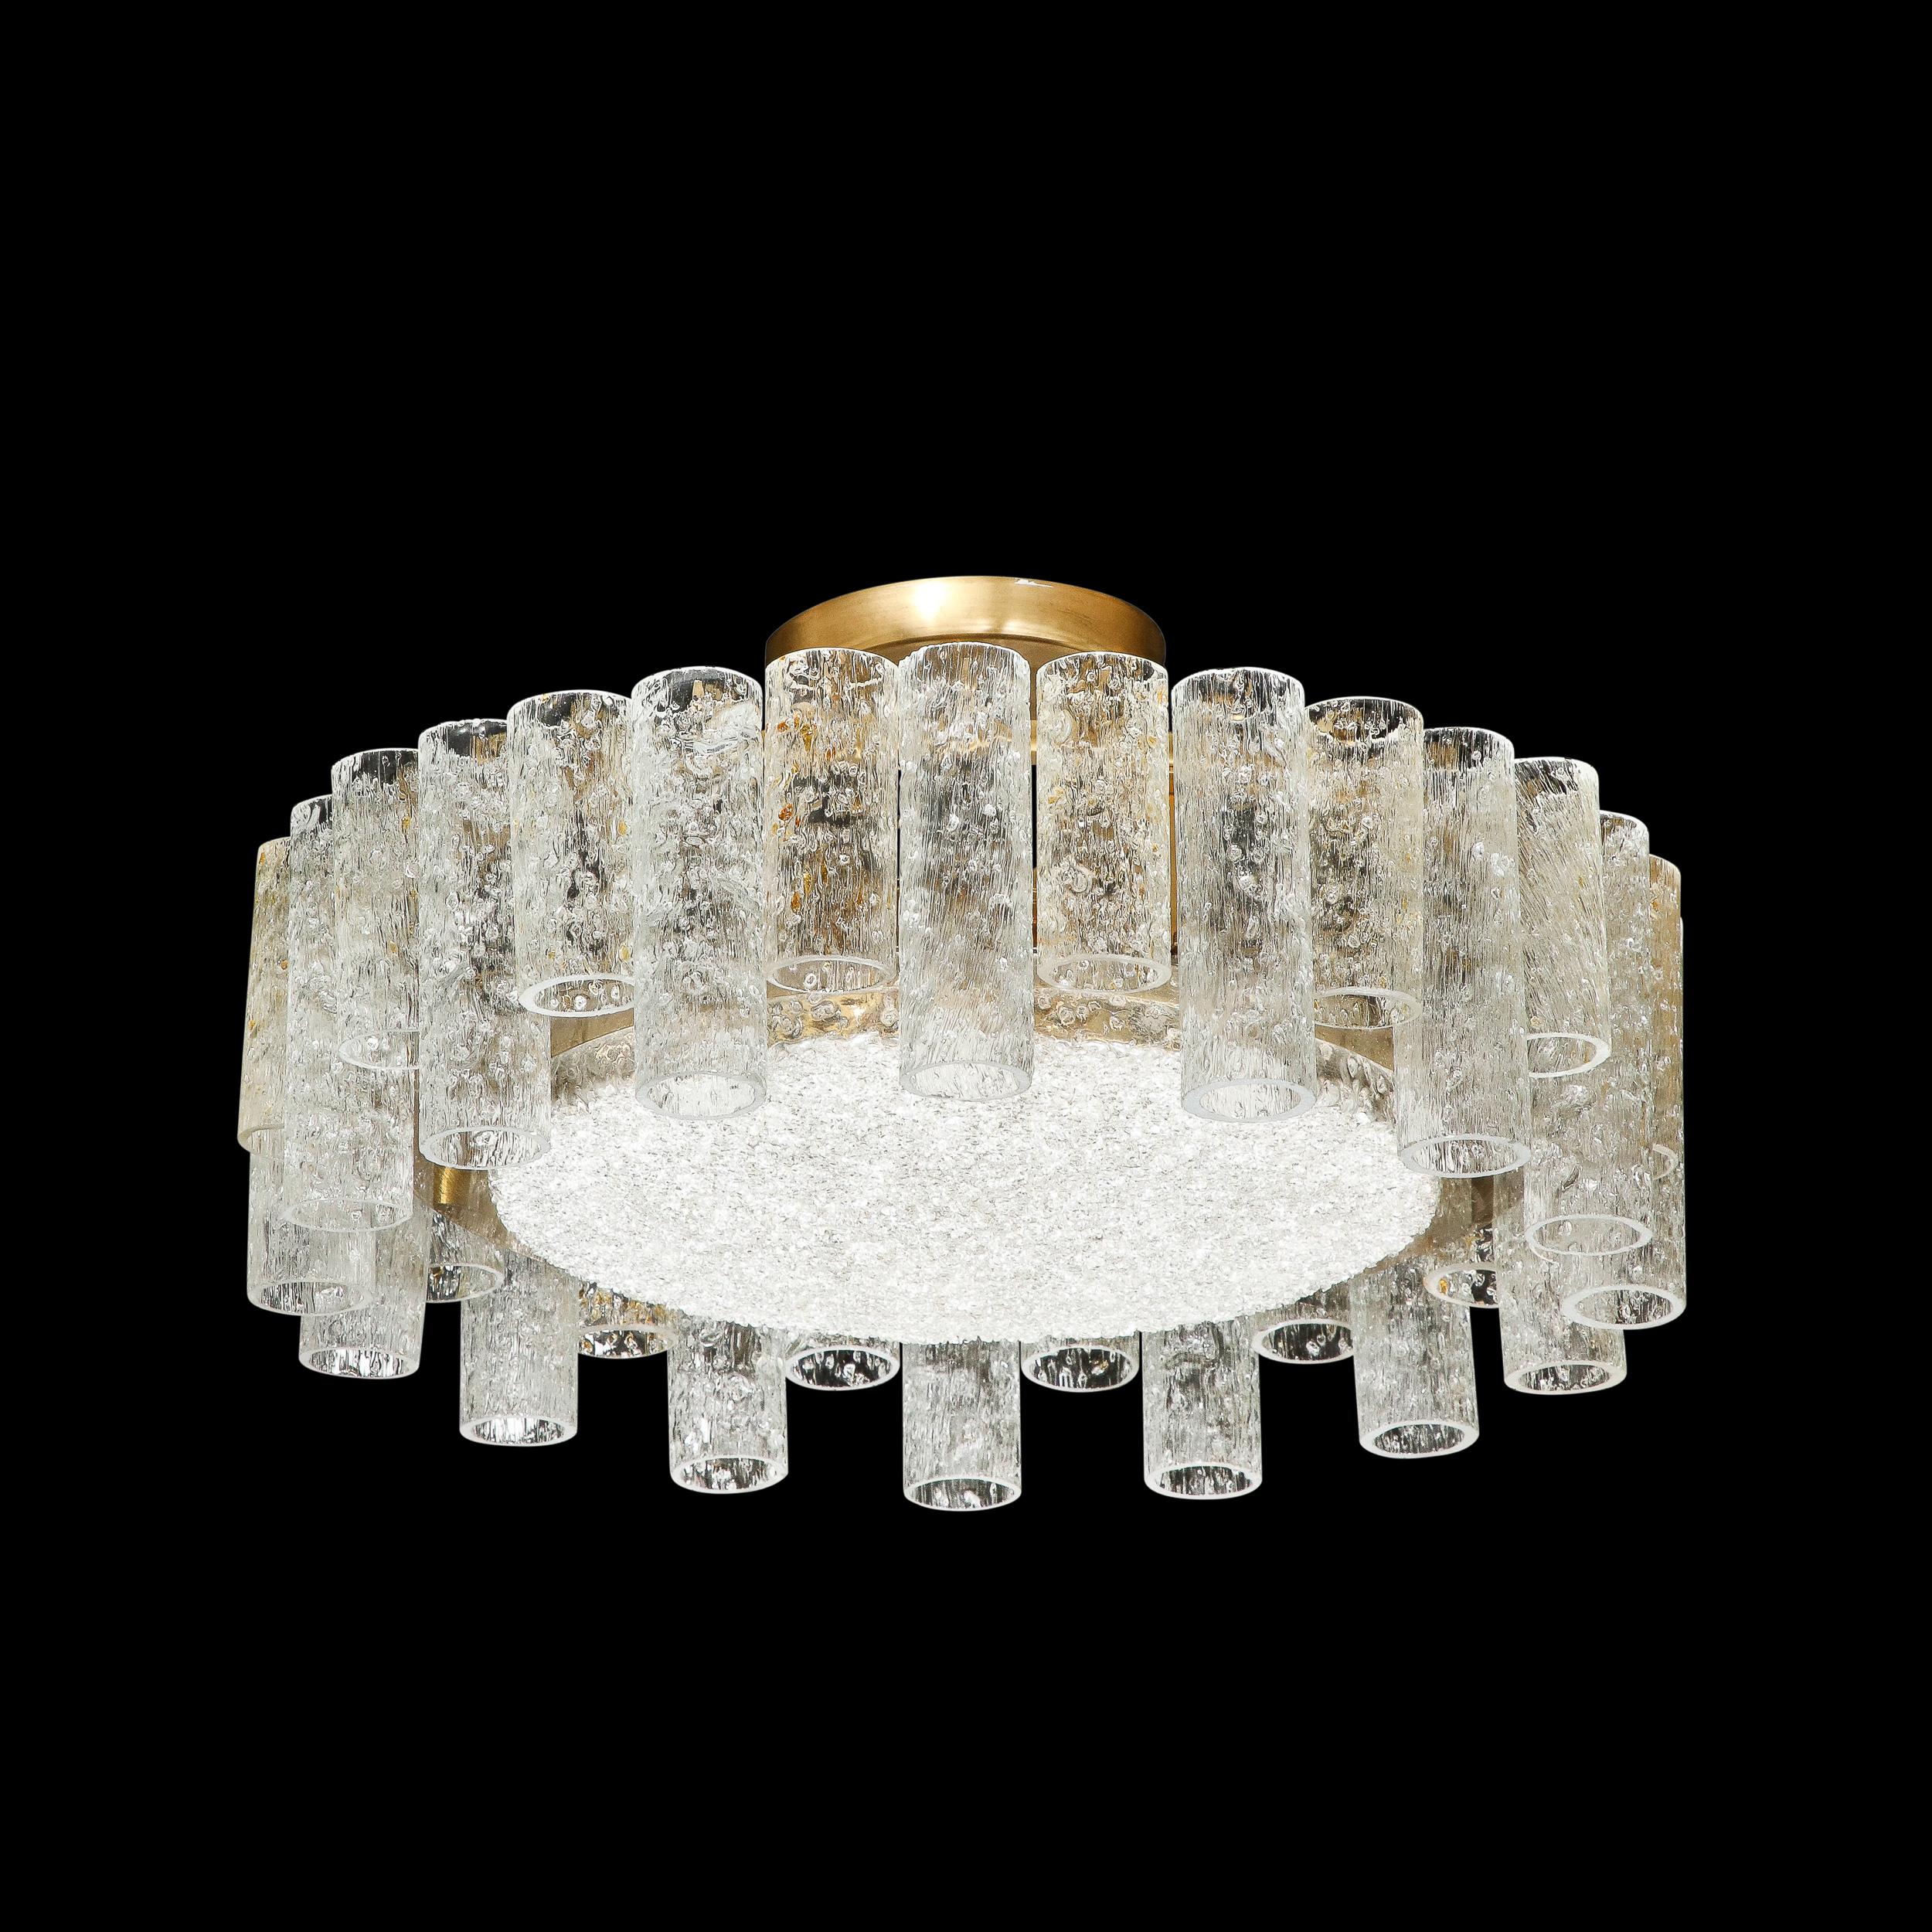 This classic and elegant Mid-Century Modernist Flush Mount Chandelier by Doria Leuchten originates from Austria, Circa 1960. Featuring a circular mottled glass shade on its undersurface circumsribed with a gleaming ring of brass seperating it from